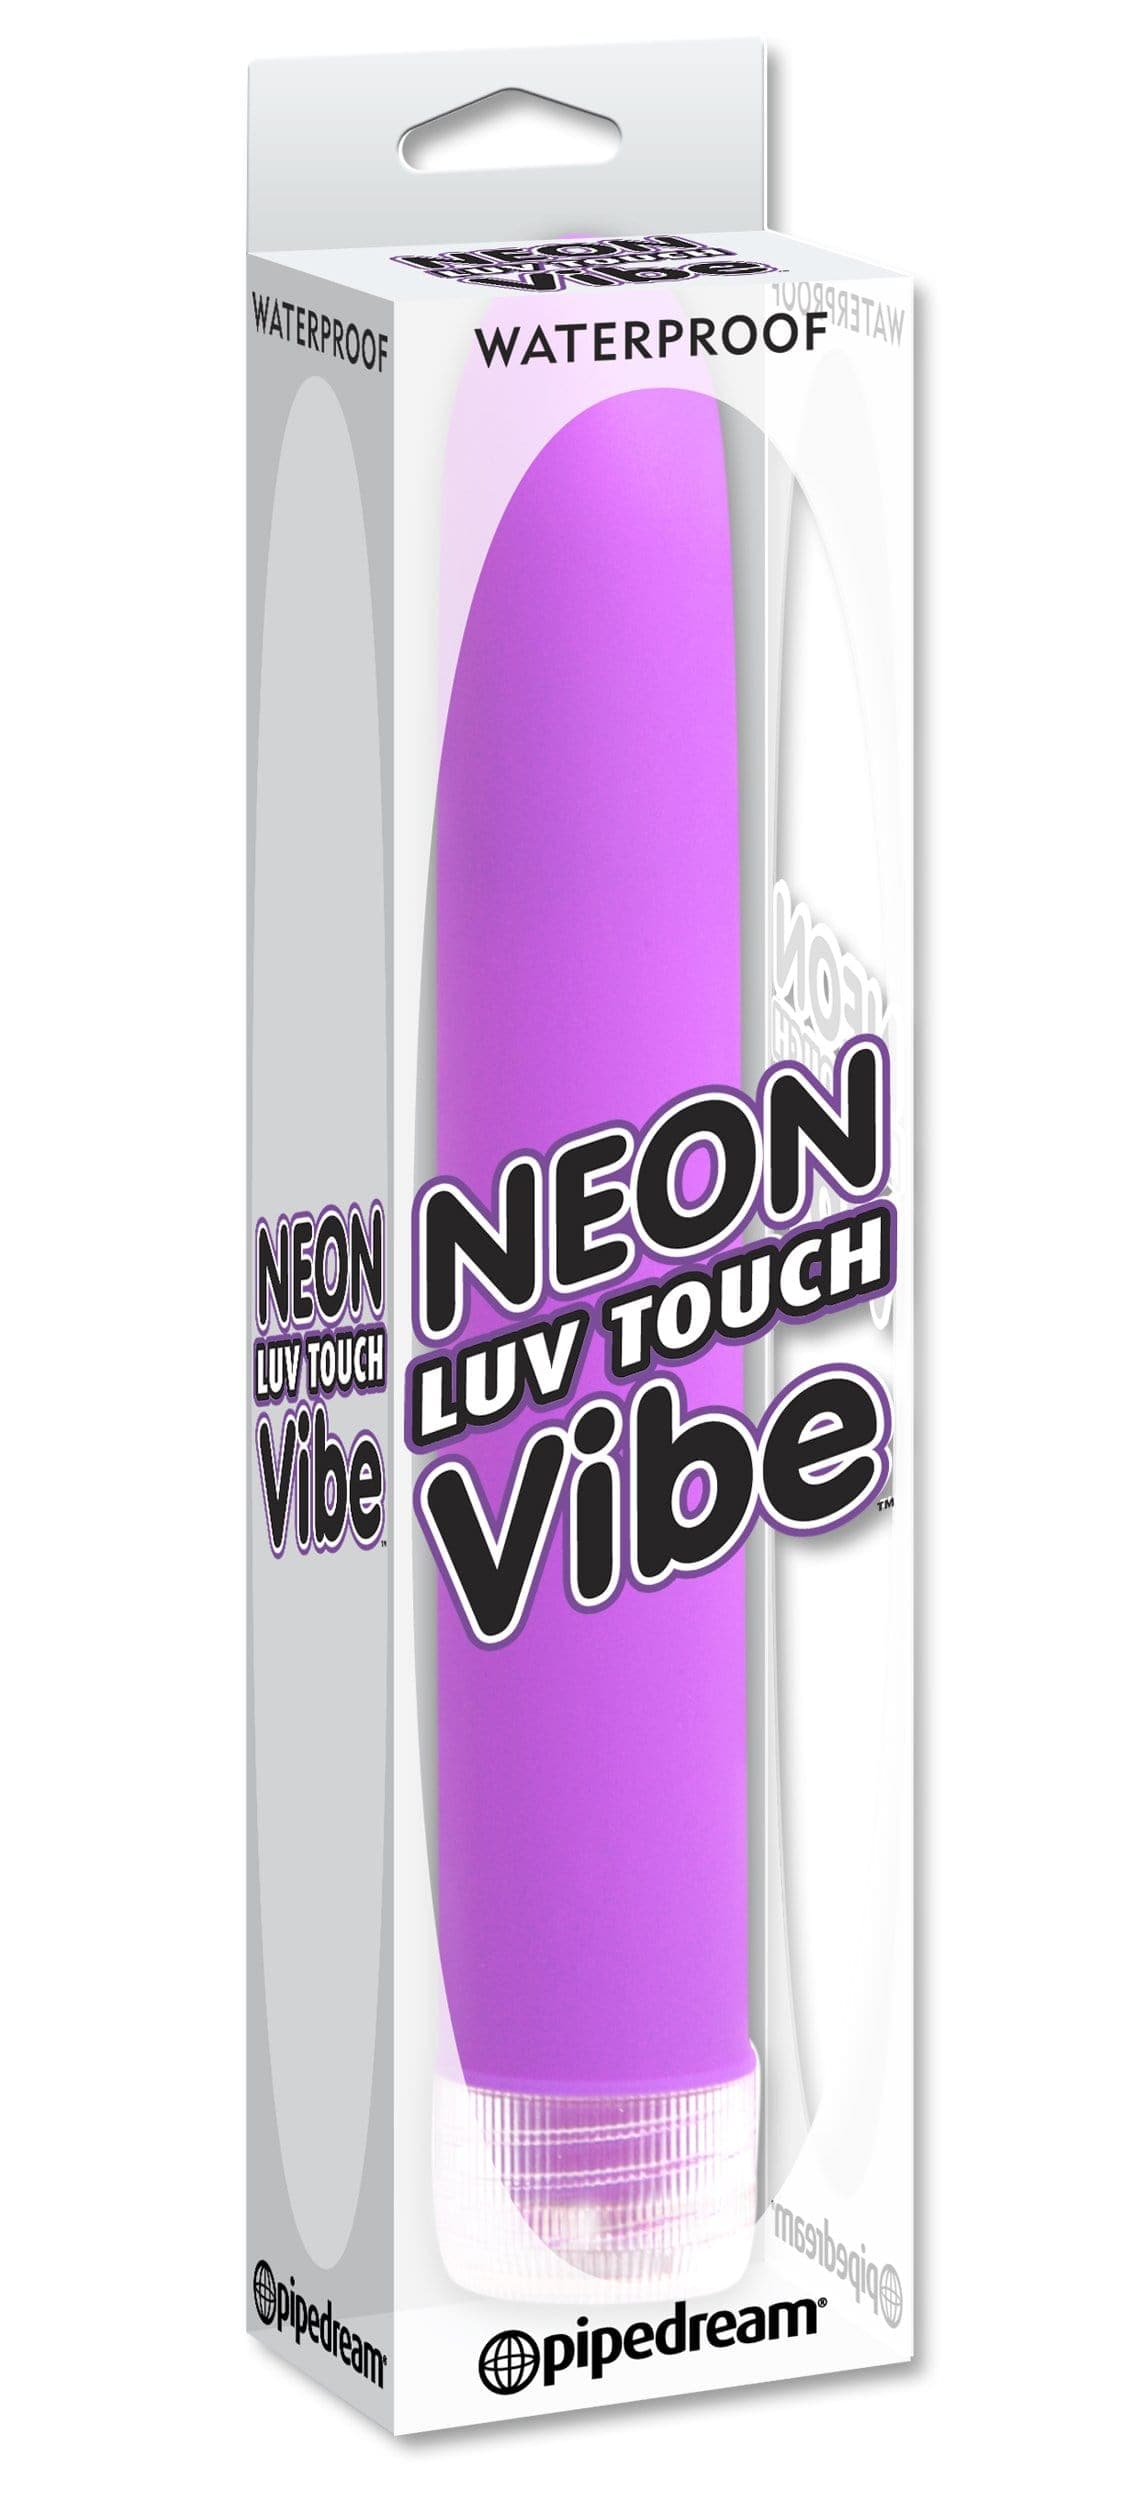 neon luv touch vibe purple